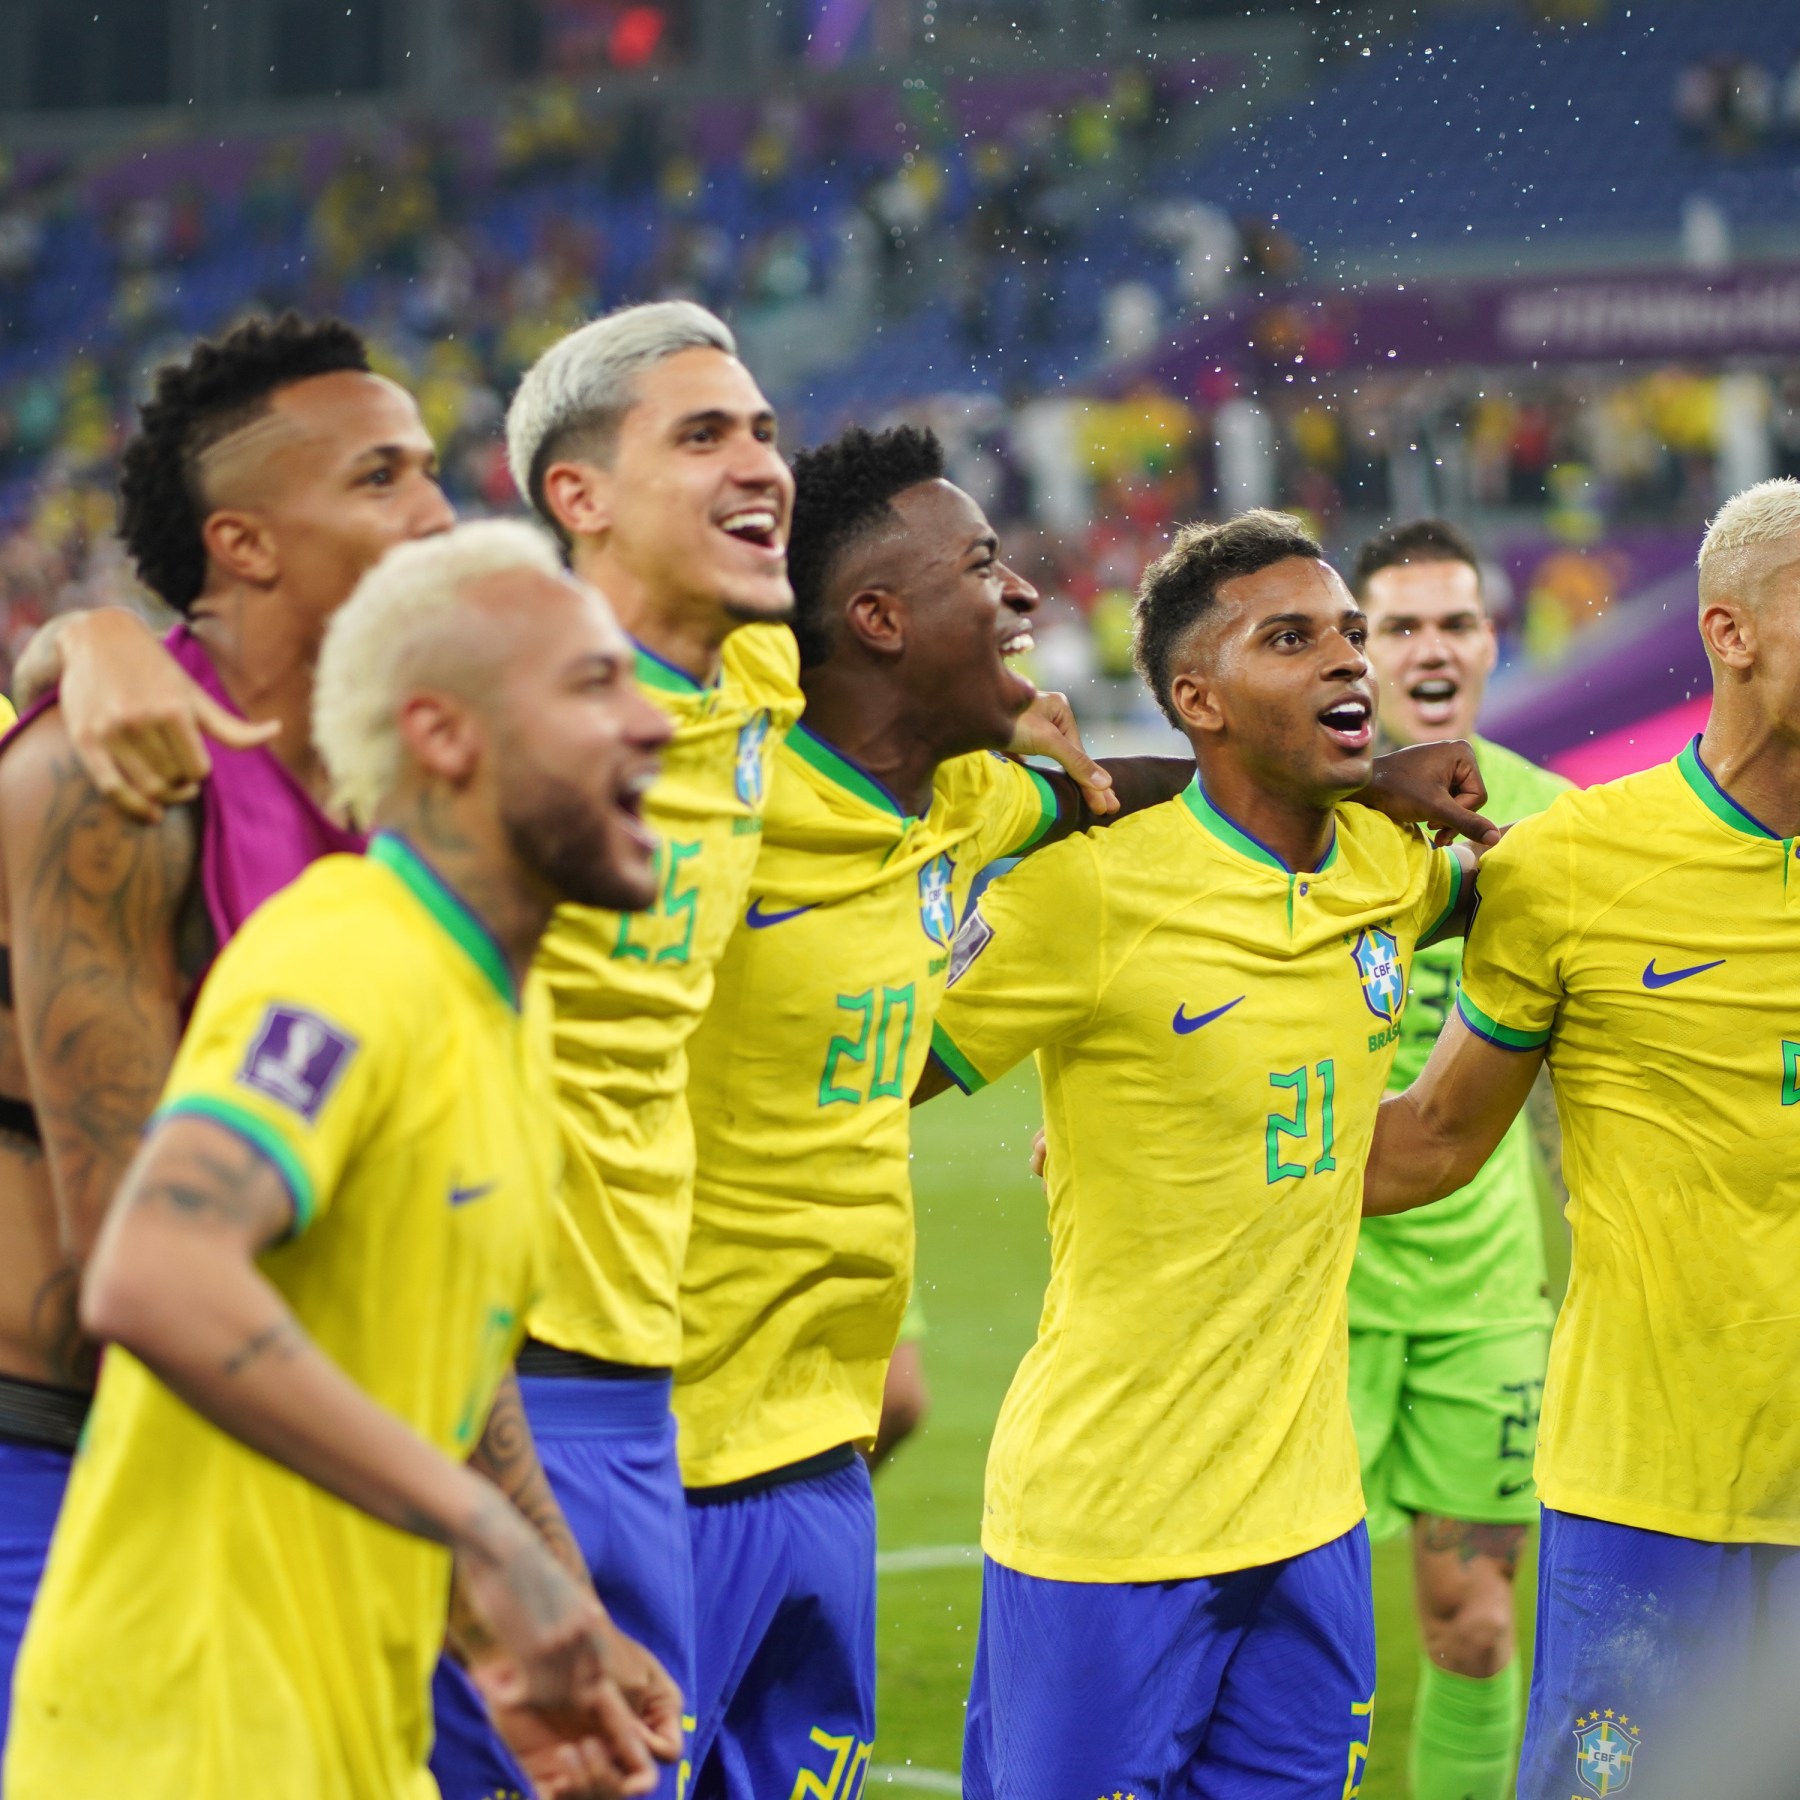 Brazil Announces Squad List for Friendly Game Against Morocco